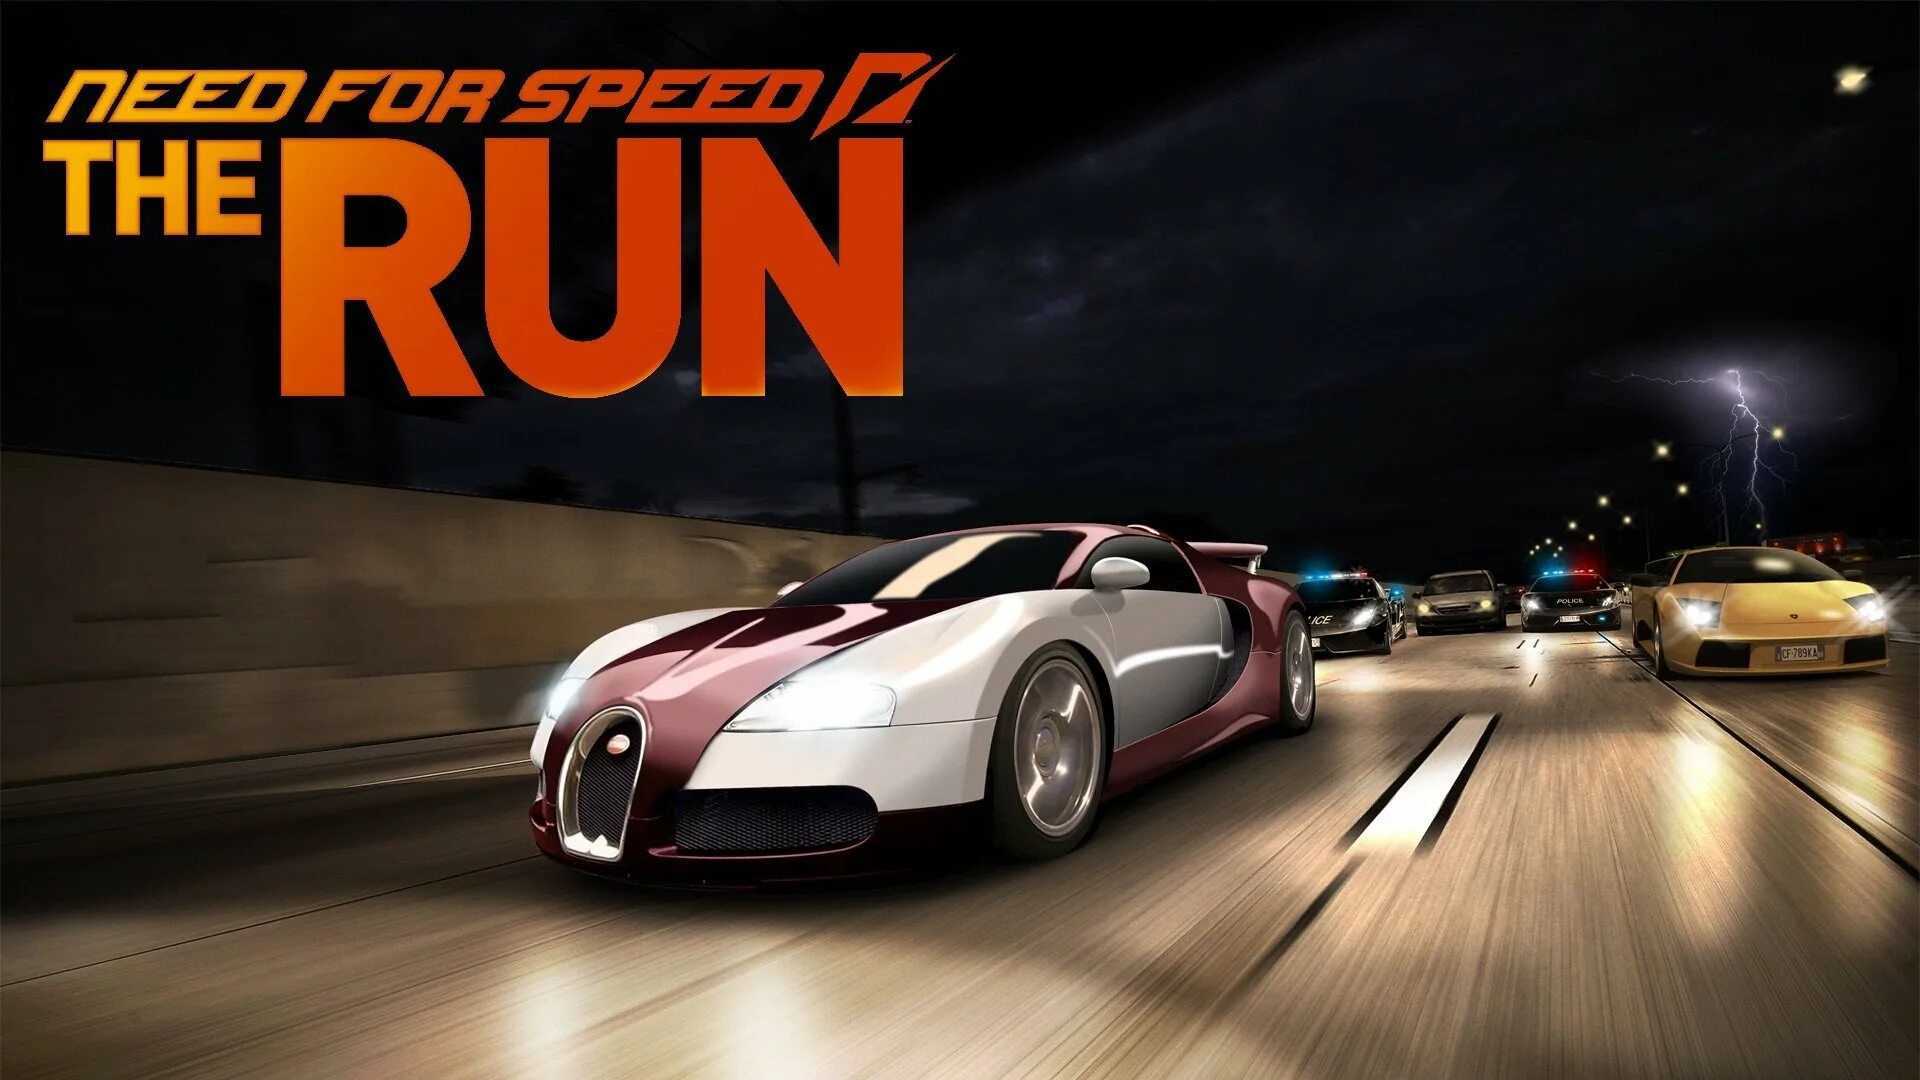 Need for Speed the Run ps3 машины. Игра need for Speed the Run. Картинки need for Speed the Run. Обои гонки. Run soundtrack